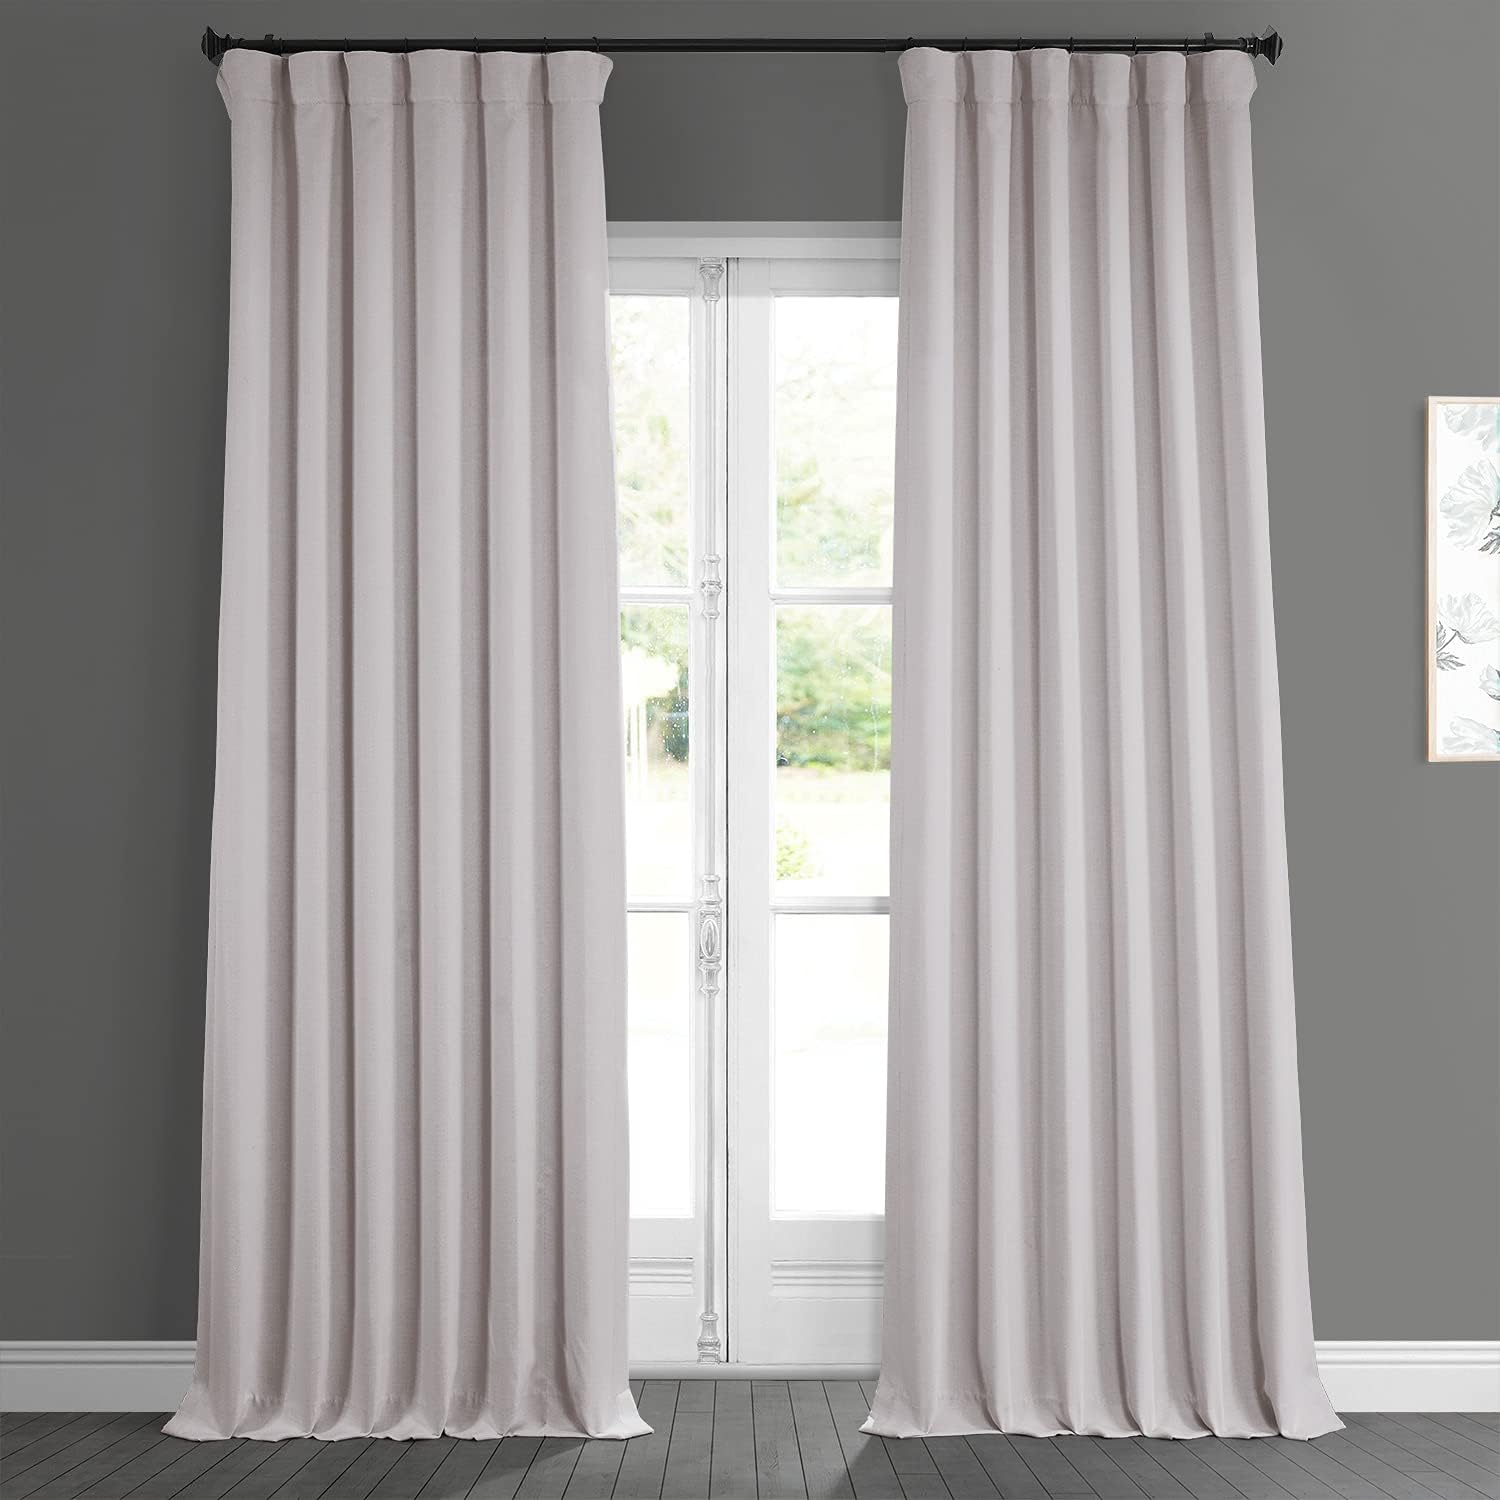 cartoon curtains photo blackout window drapes luxury 3d curtains for living room bed room office hotel Шторы HPD Half Price Drapes Faux Linen Room Darkening Curtains, 127x274 см, светло-бежевый